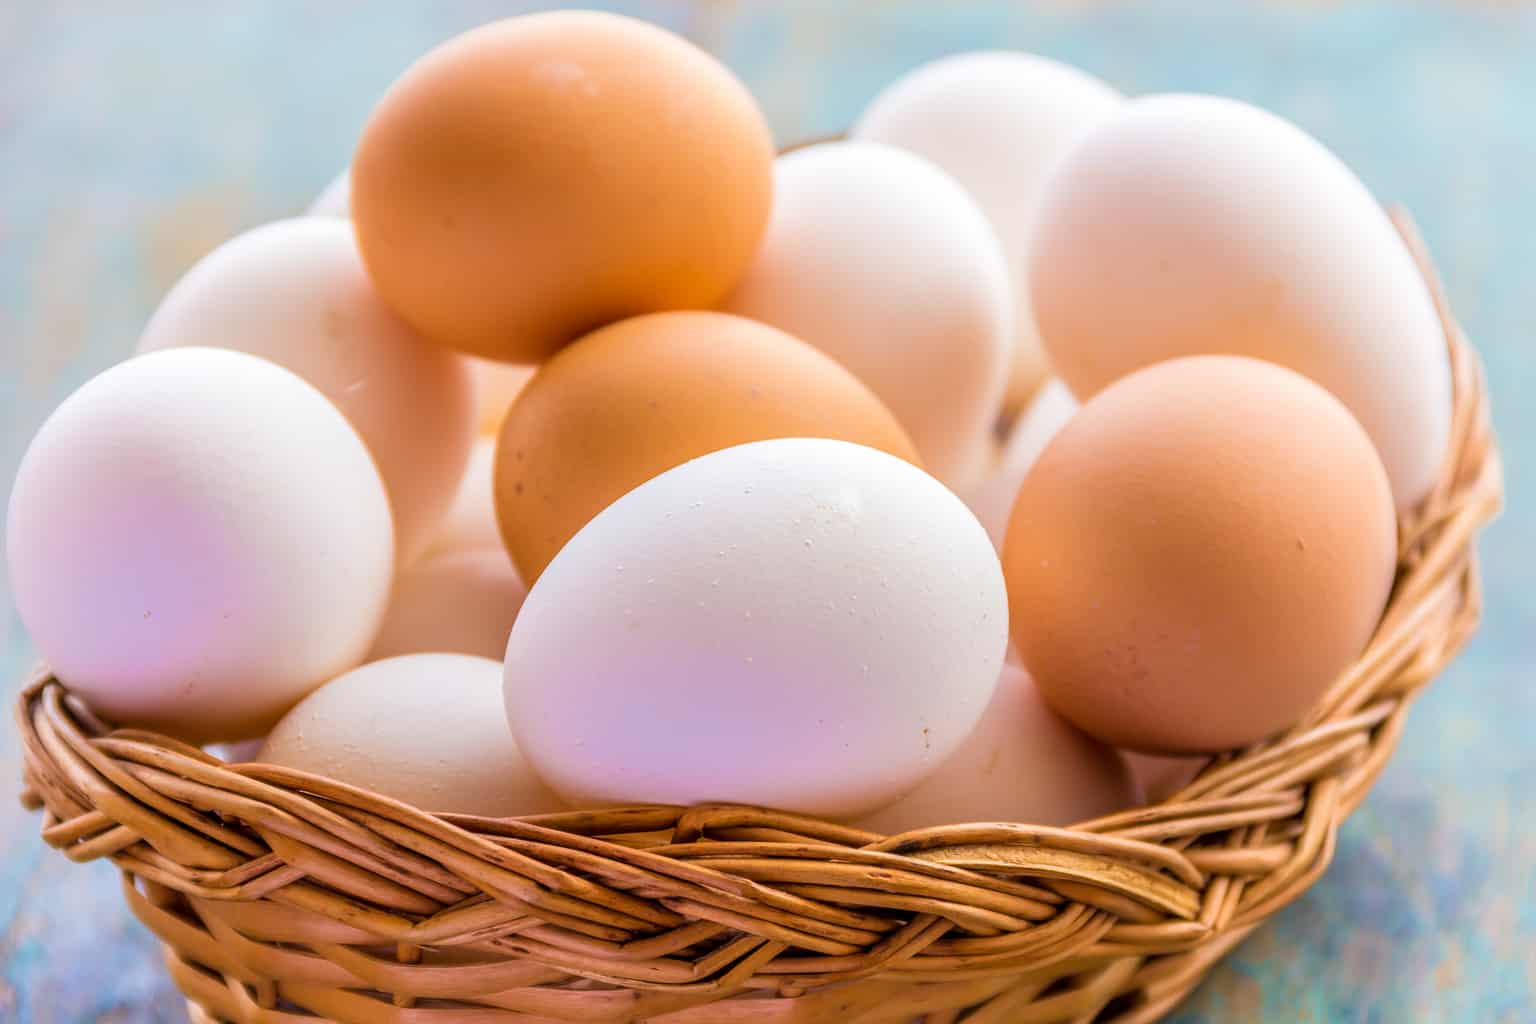 Are eggs safe?